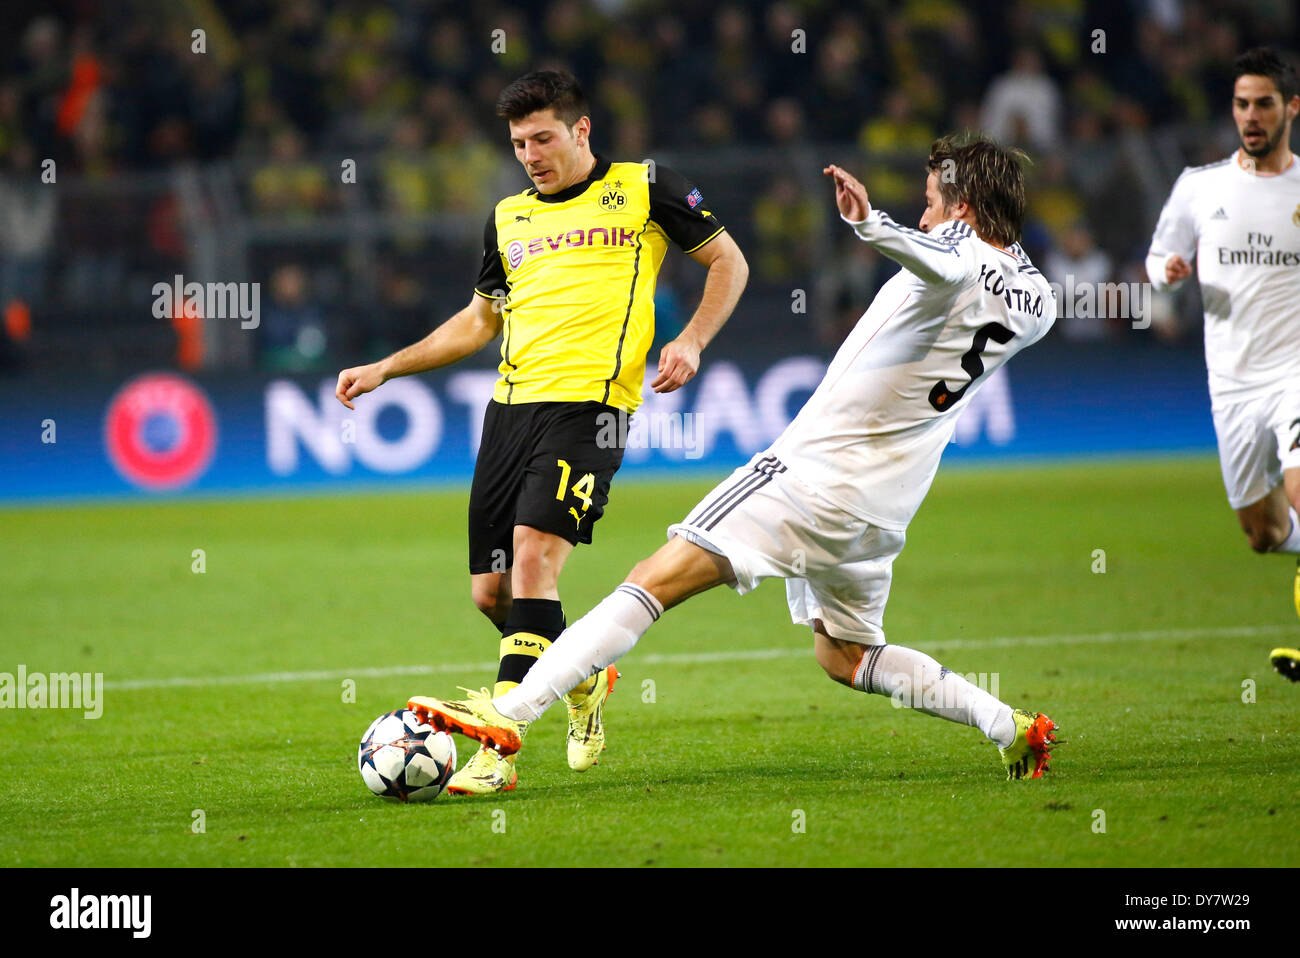 Dortmunds Milos Jojic (L) against Madrids Fabio Coentrao during quarterfinals of the Champions League match between Borussia Dortmund and Real Madrid, Signal Iduna Park in Dortmund on April 08., 2013. Stock Photo